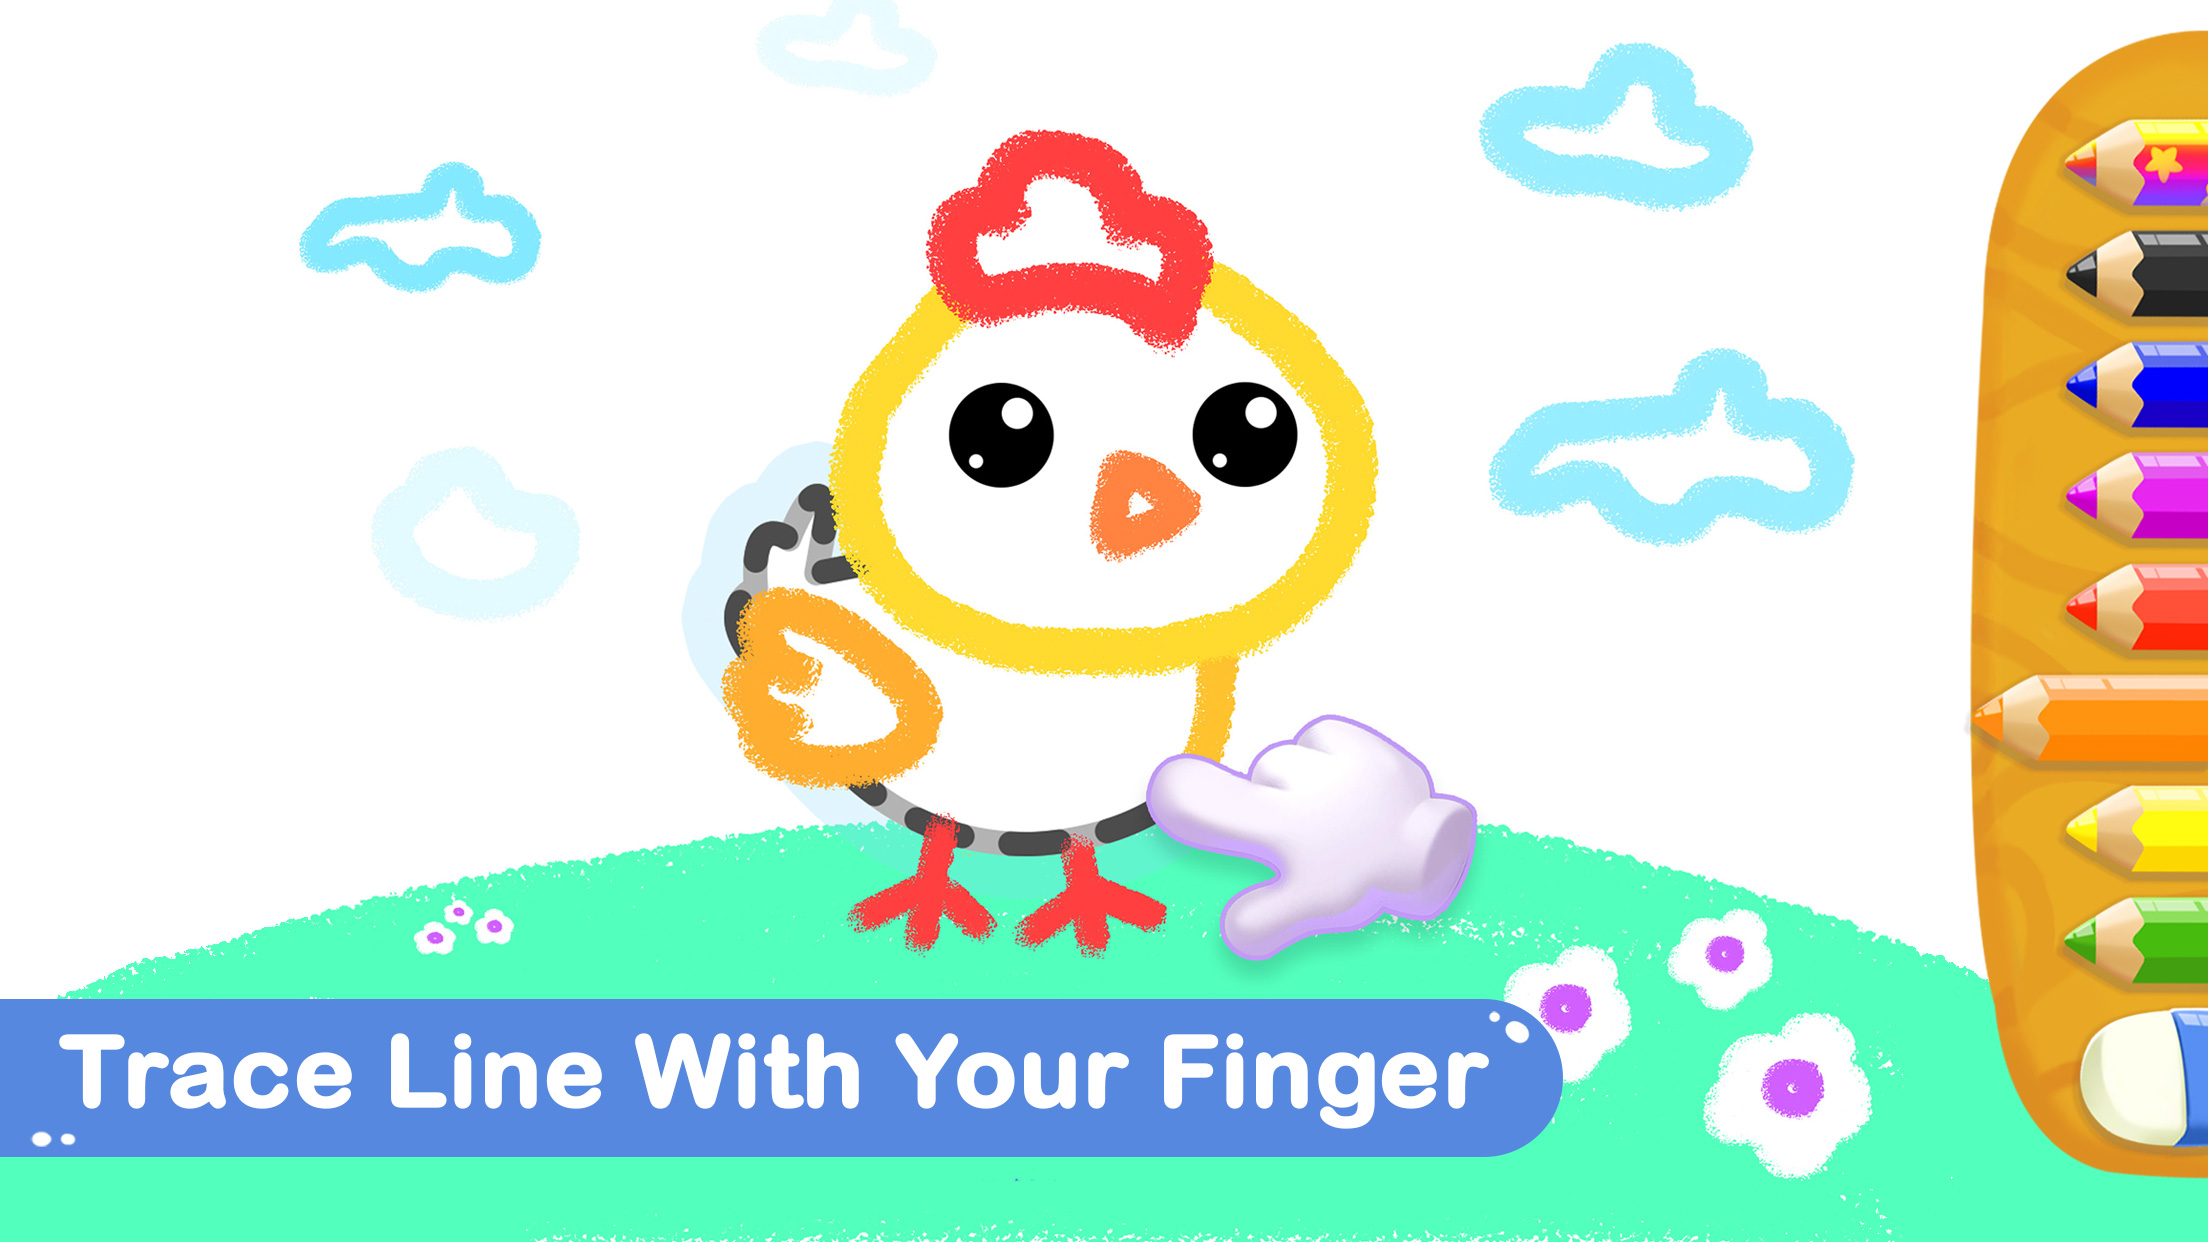 Play Toddler Drawing Games For Kids Online for Free on PC & Mobile